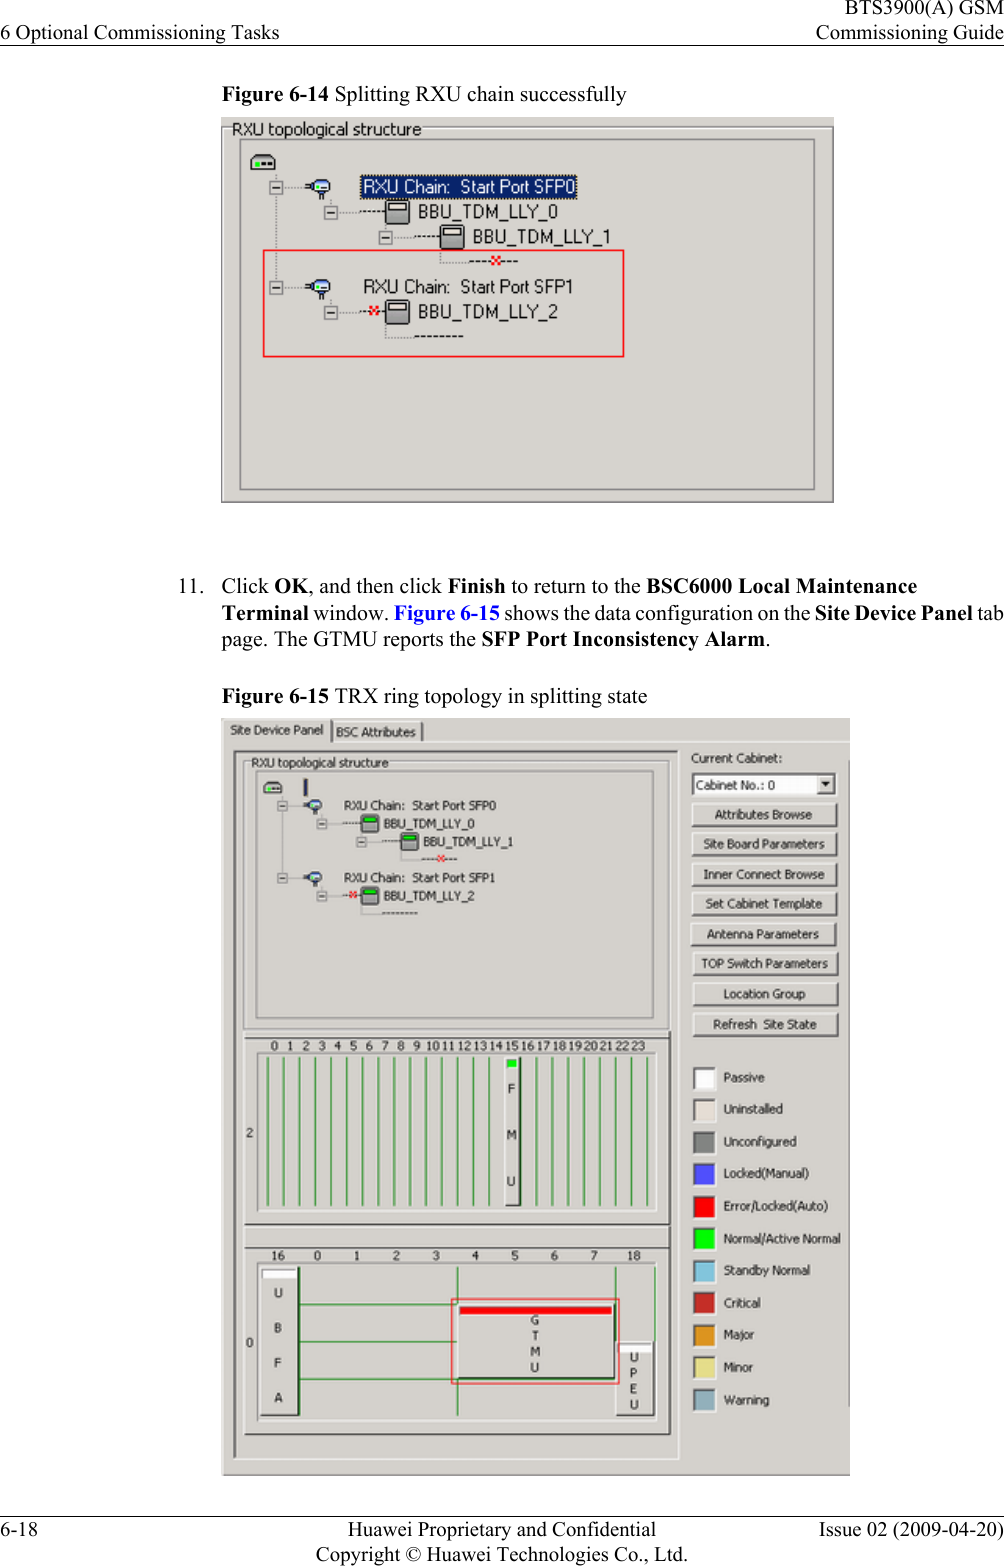 Figure 6-14 Splitting RXU chain successfully 11. Click OK, and then click Finish to return to the BSC6000 Local MaintenanceTerminal window. Figure 6-15 shows the data configuration on the Site Device Panel tabpage. The GTMU reports the SFP Port Inconsistency Alarm.Figure 6-15 TRX ring topology in splitting state6 Optional Commissioning TasksBTS3900(A) GSMCommissioning Guide6-18 Huawei Proprietary and ConfidentialCopyright © Huawei Technologies Co., Ltd.Issue 02 (2009-04-20)